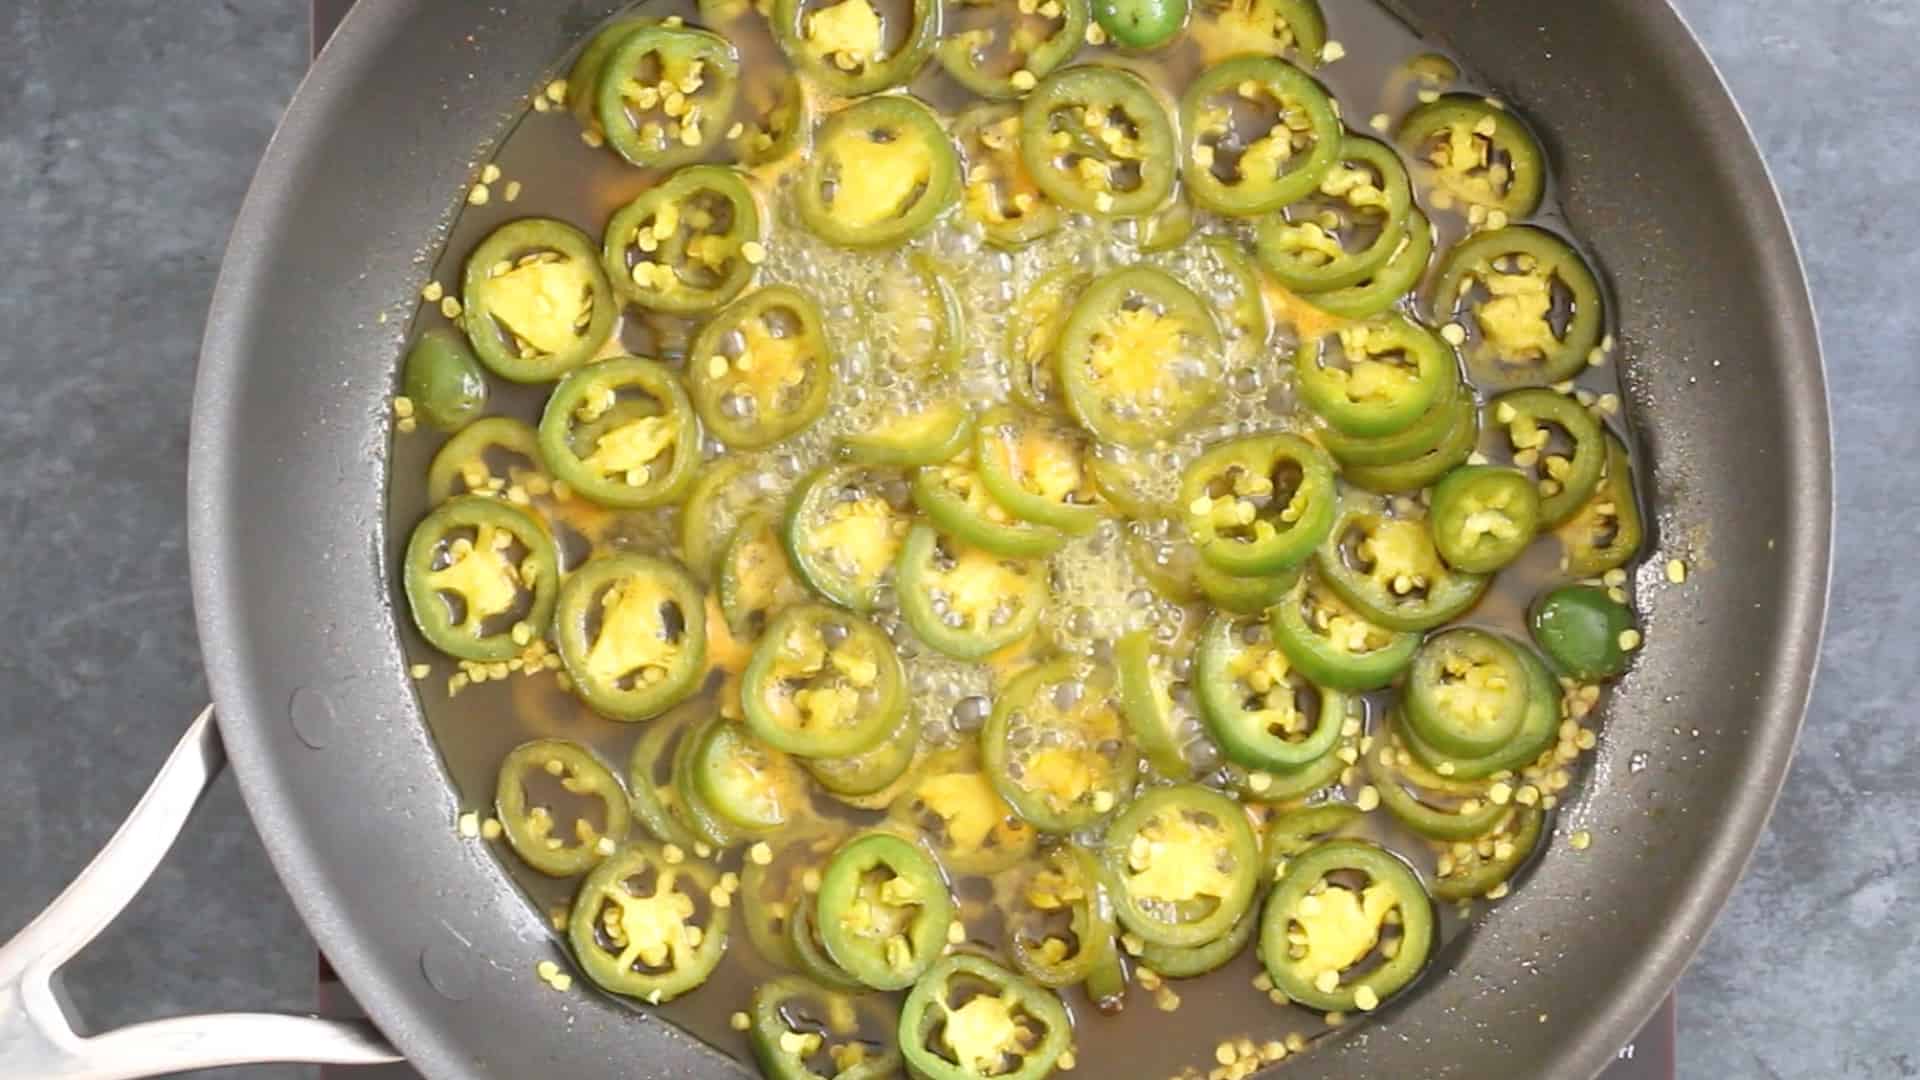 Simmering jalapeno peppers in a pan to make Candied Jalapenos (Cowboy Candy)